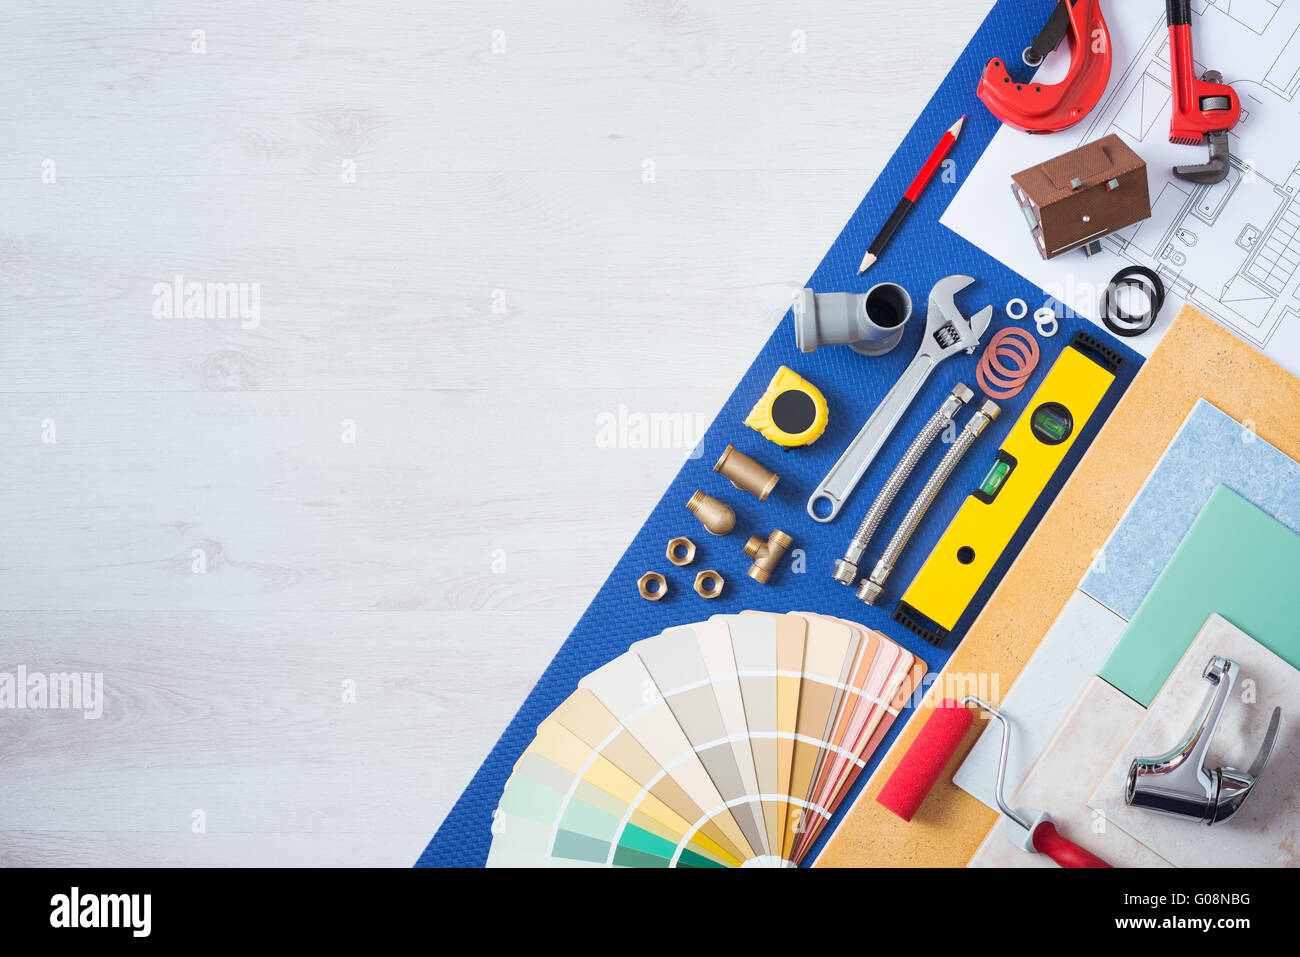 Home improvement and repair concept, plumbing work tools, tap, tiles and color swatches top view Stock Photo